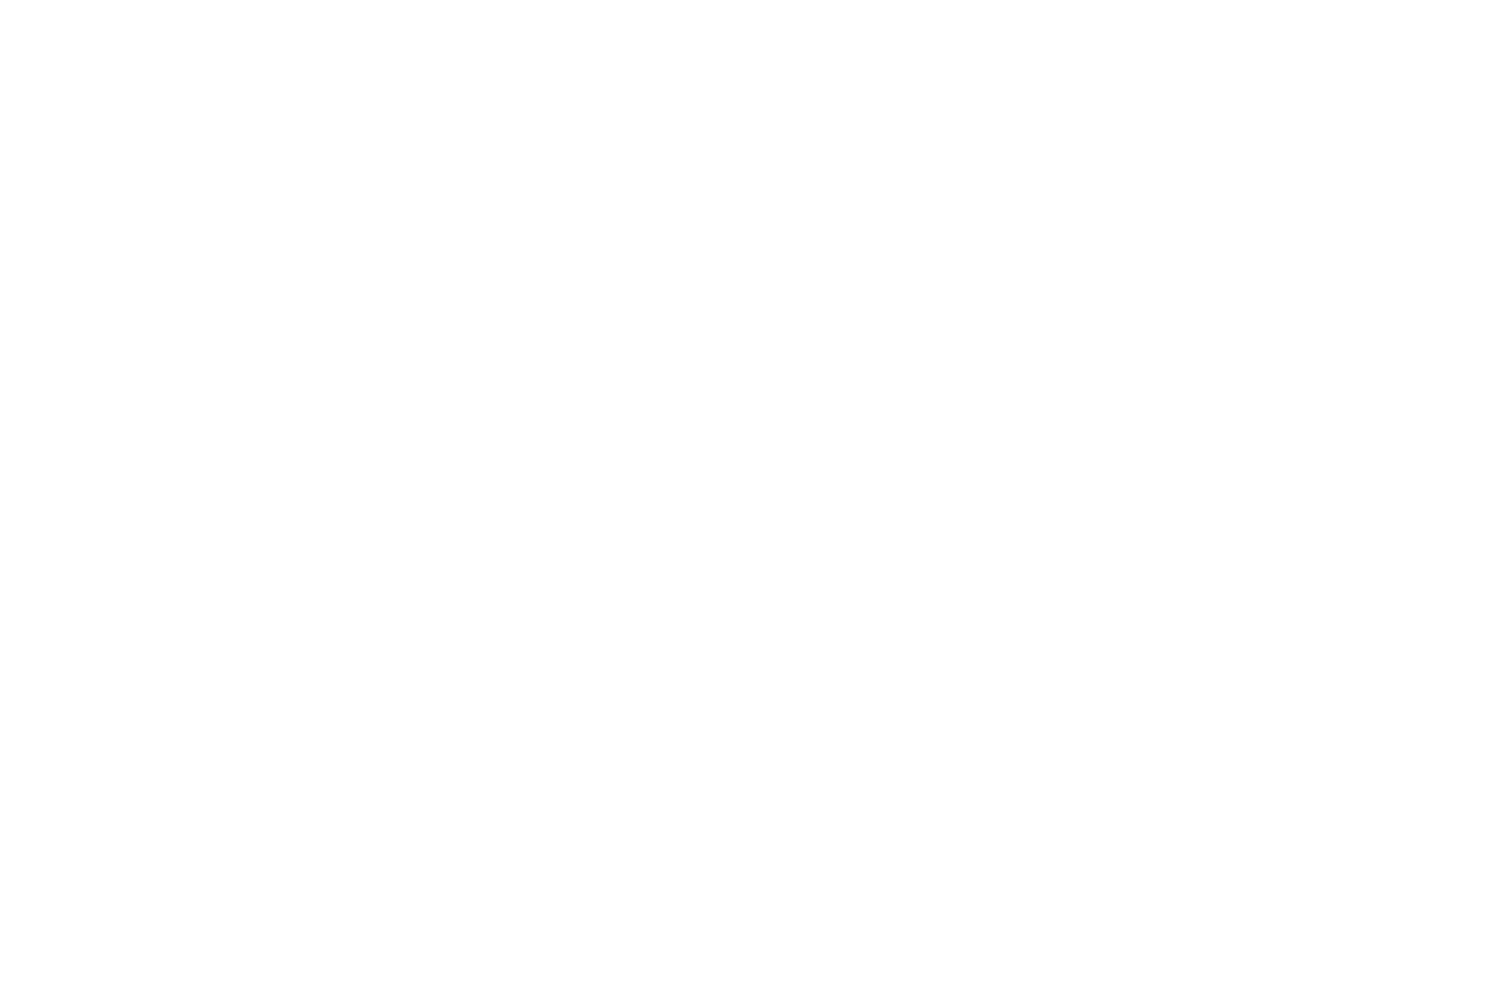 The Garden City Project